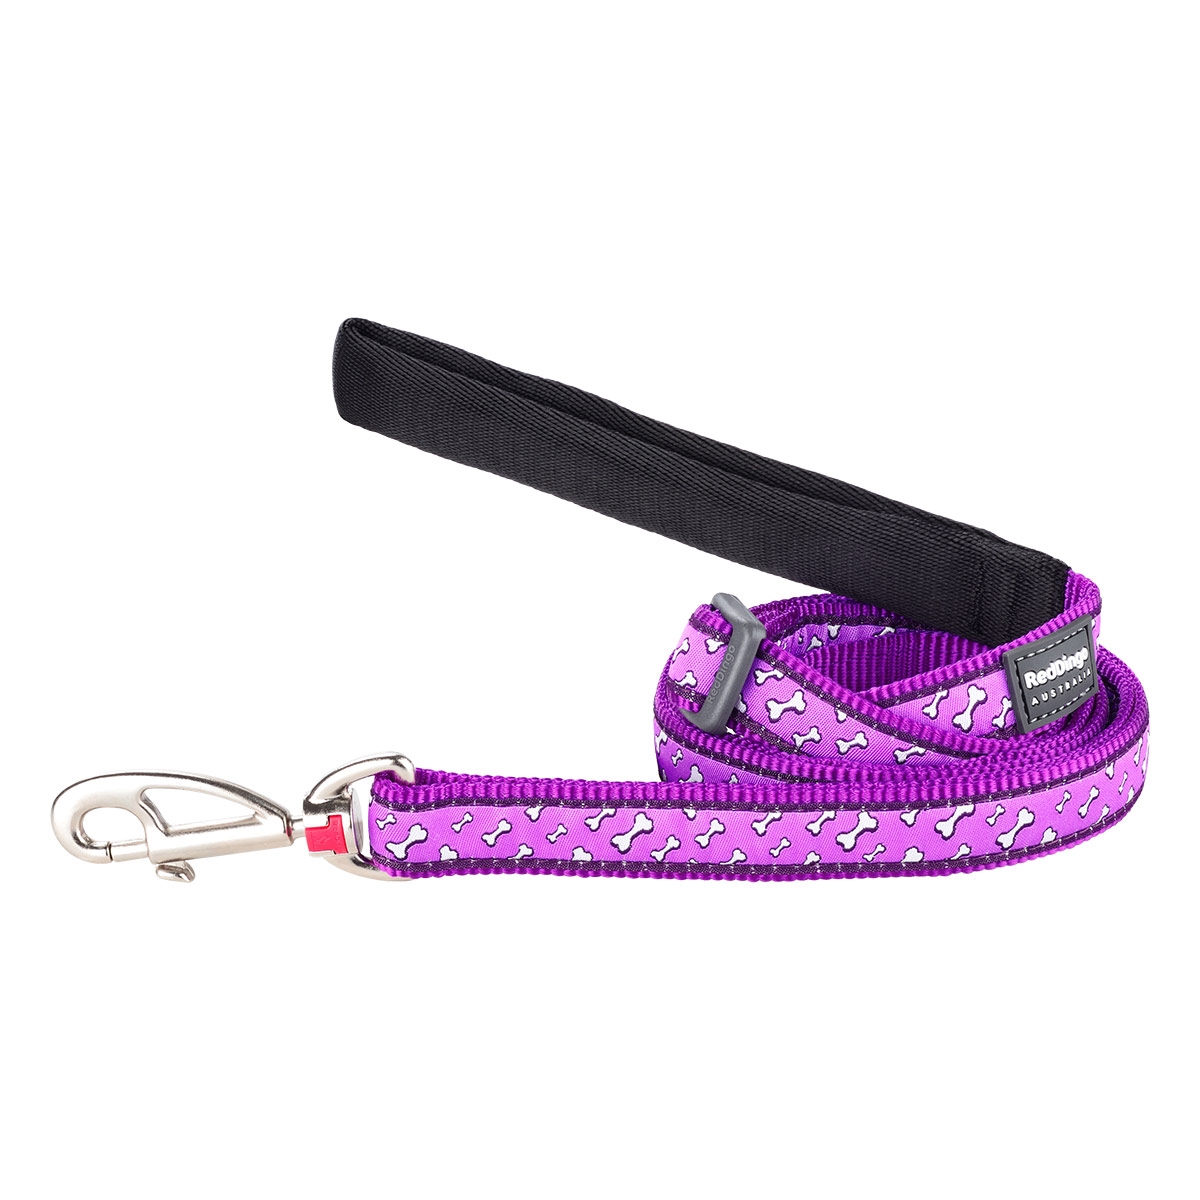 Picture of Red Dingo L6-FL-PU-12 Dog Lead Design Flying Bones Purple - Extra Small 6ft